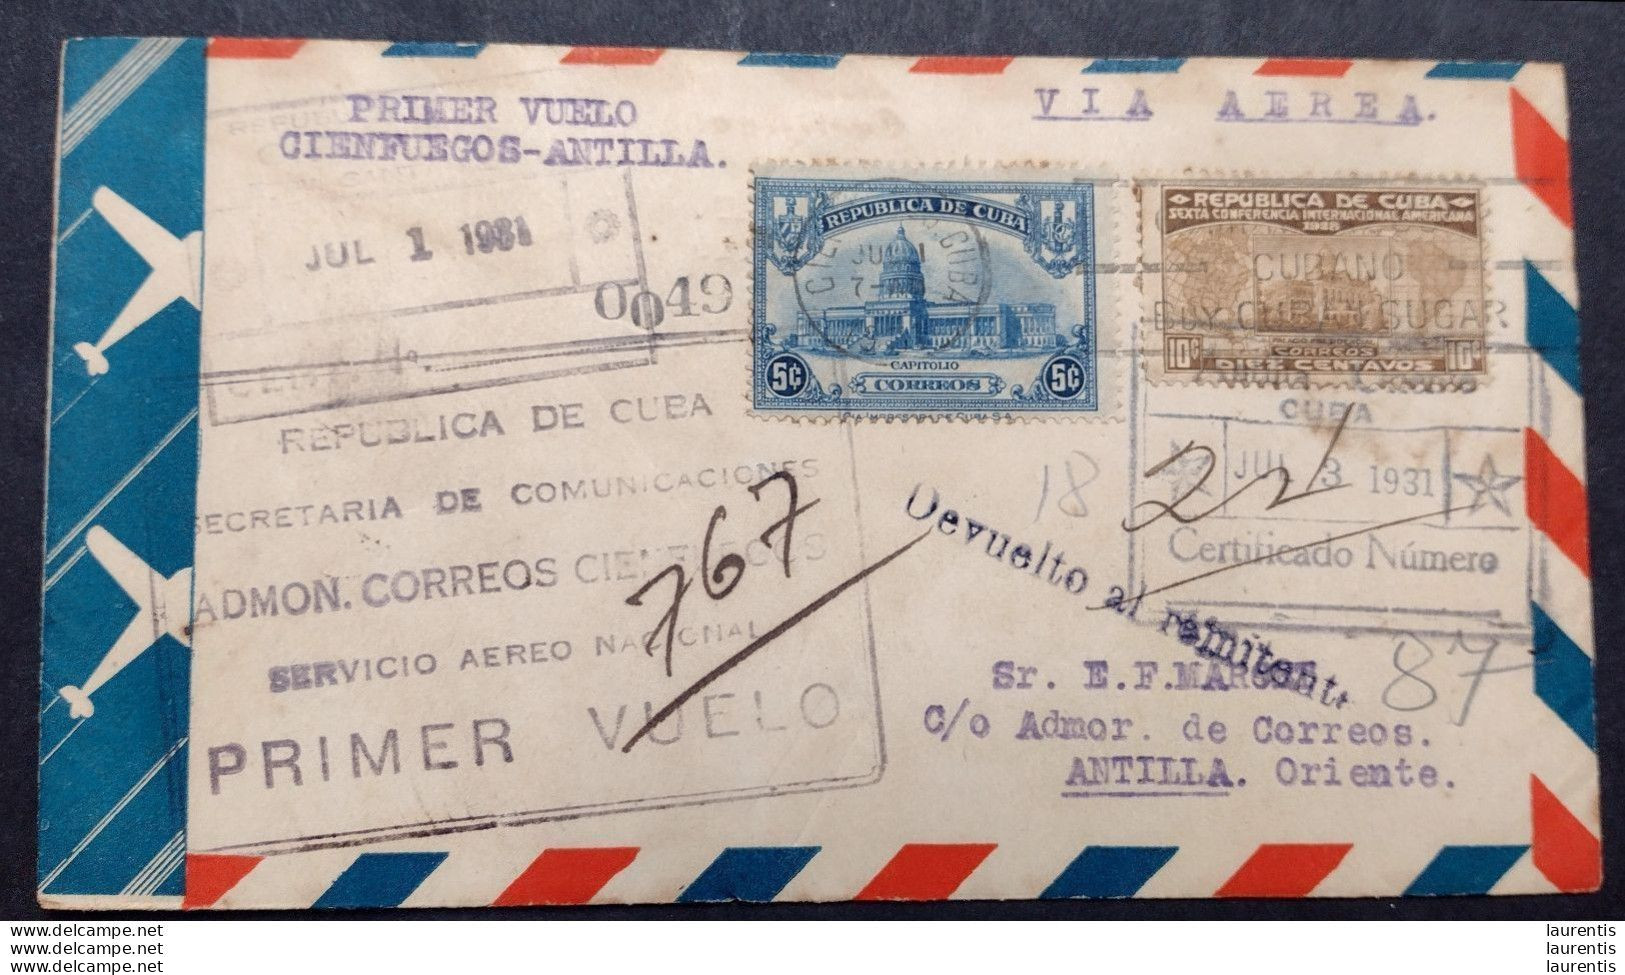 D575. First Flight Cienfuegos-Antilla - Registered On July 1st, 1931 - Only 14 Covers Are Known - 215,00 - Aéreo